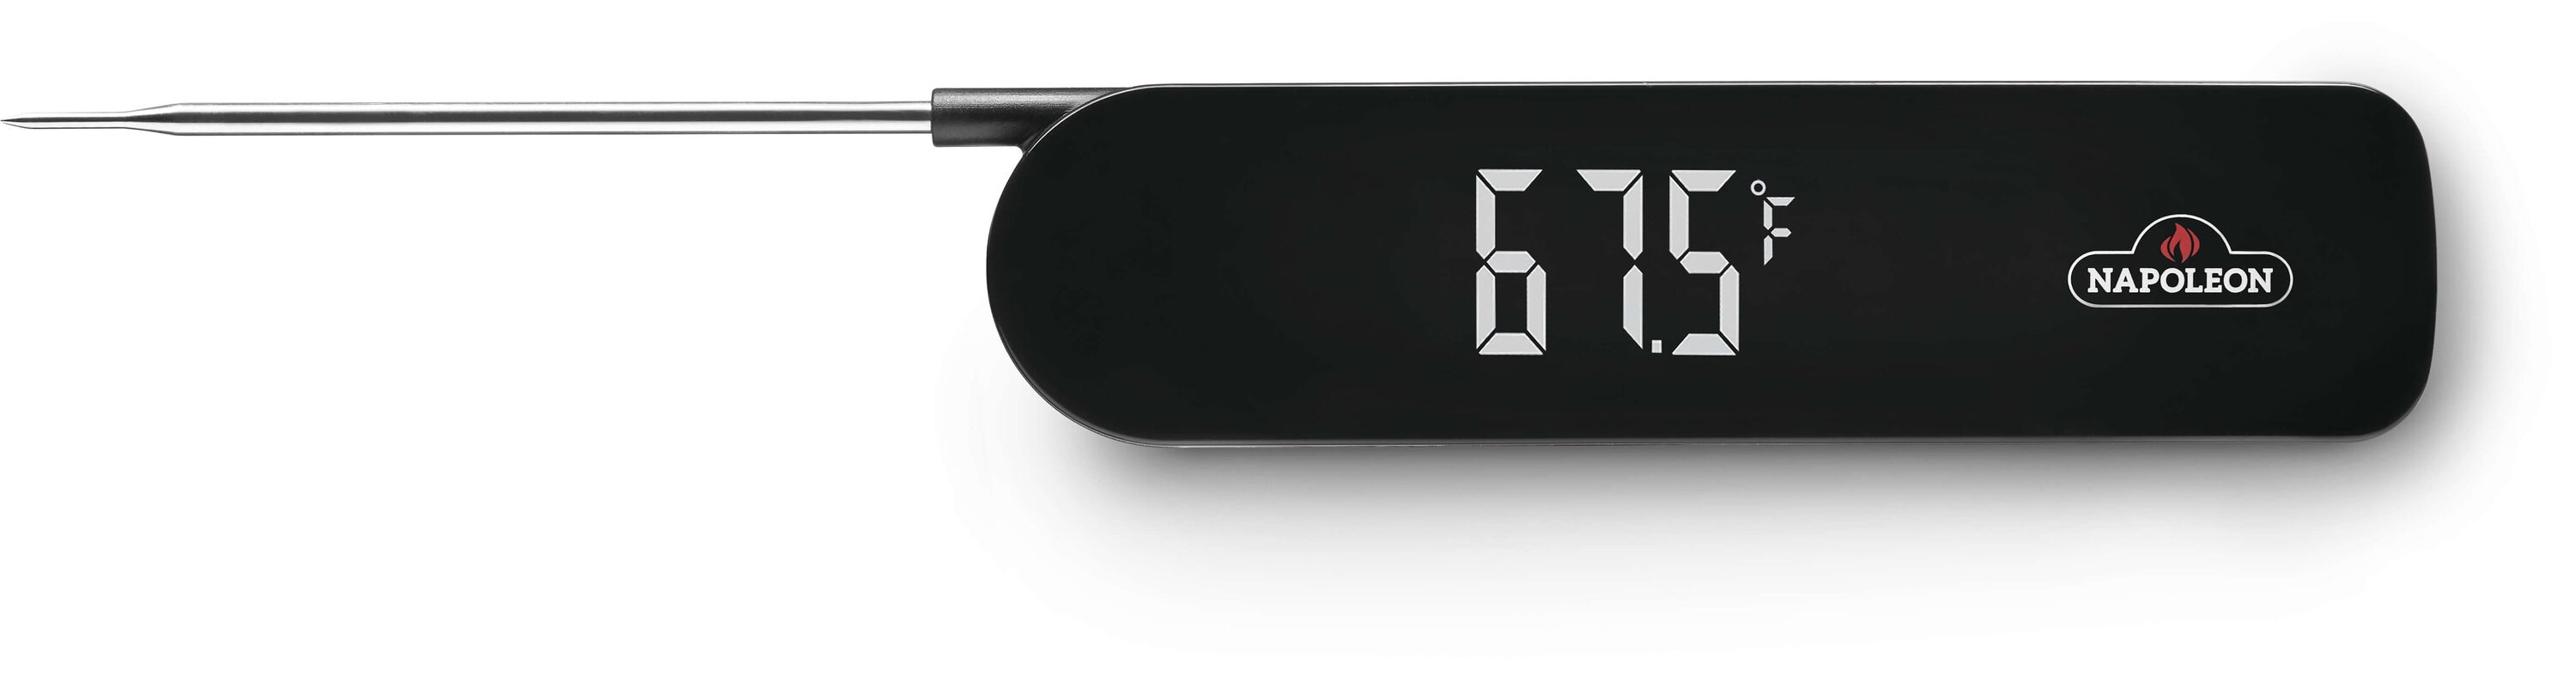 Bios Meat And Oven Thermometer With 3-inch Dial : Target